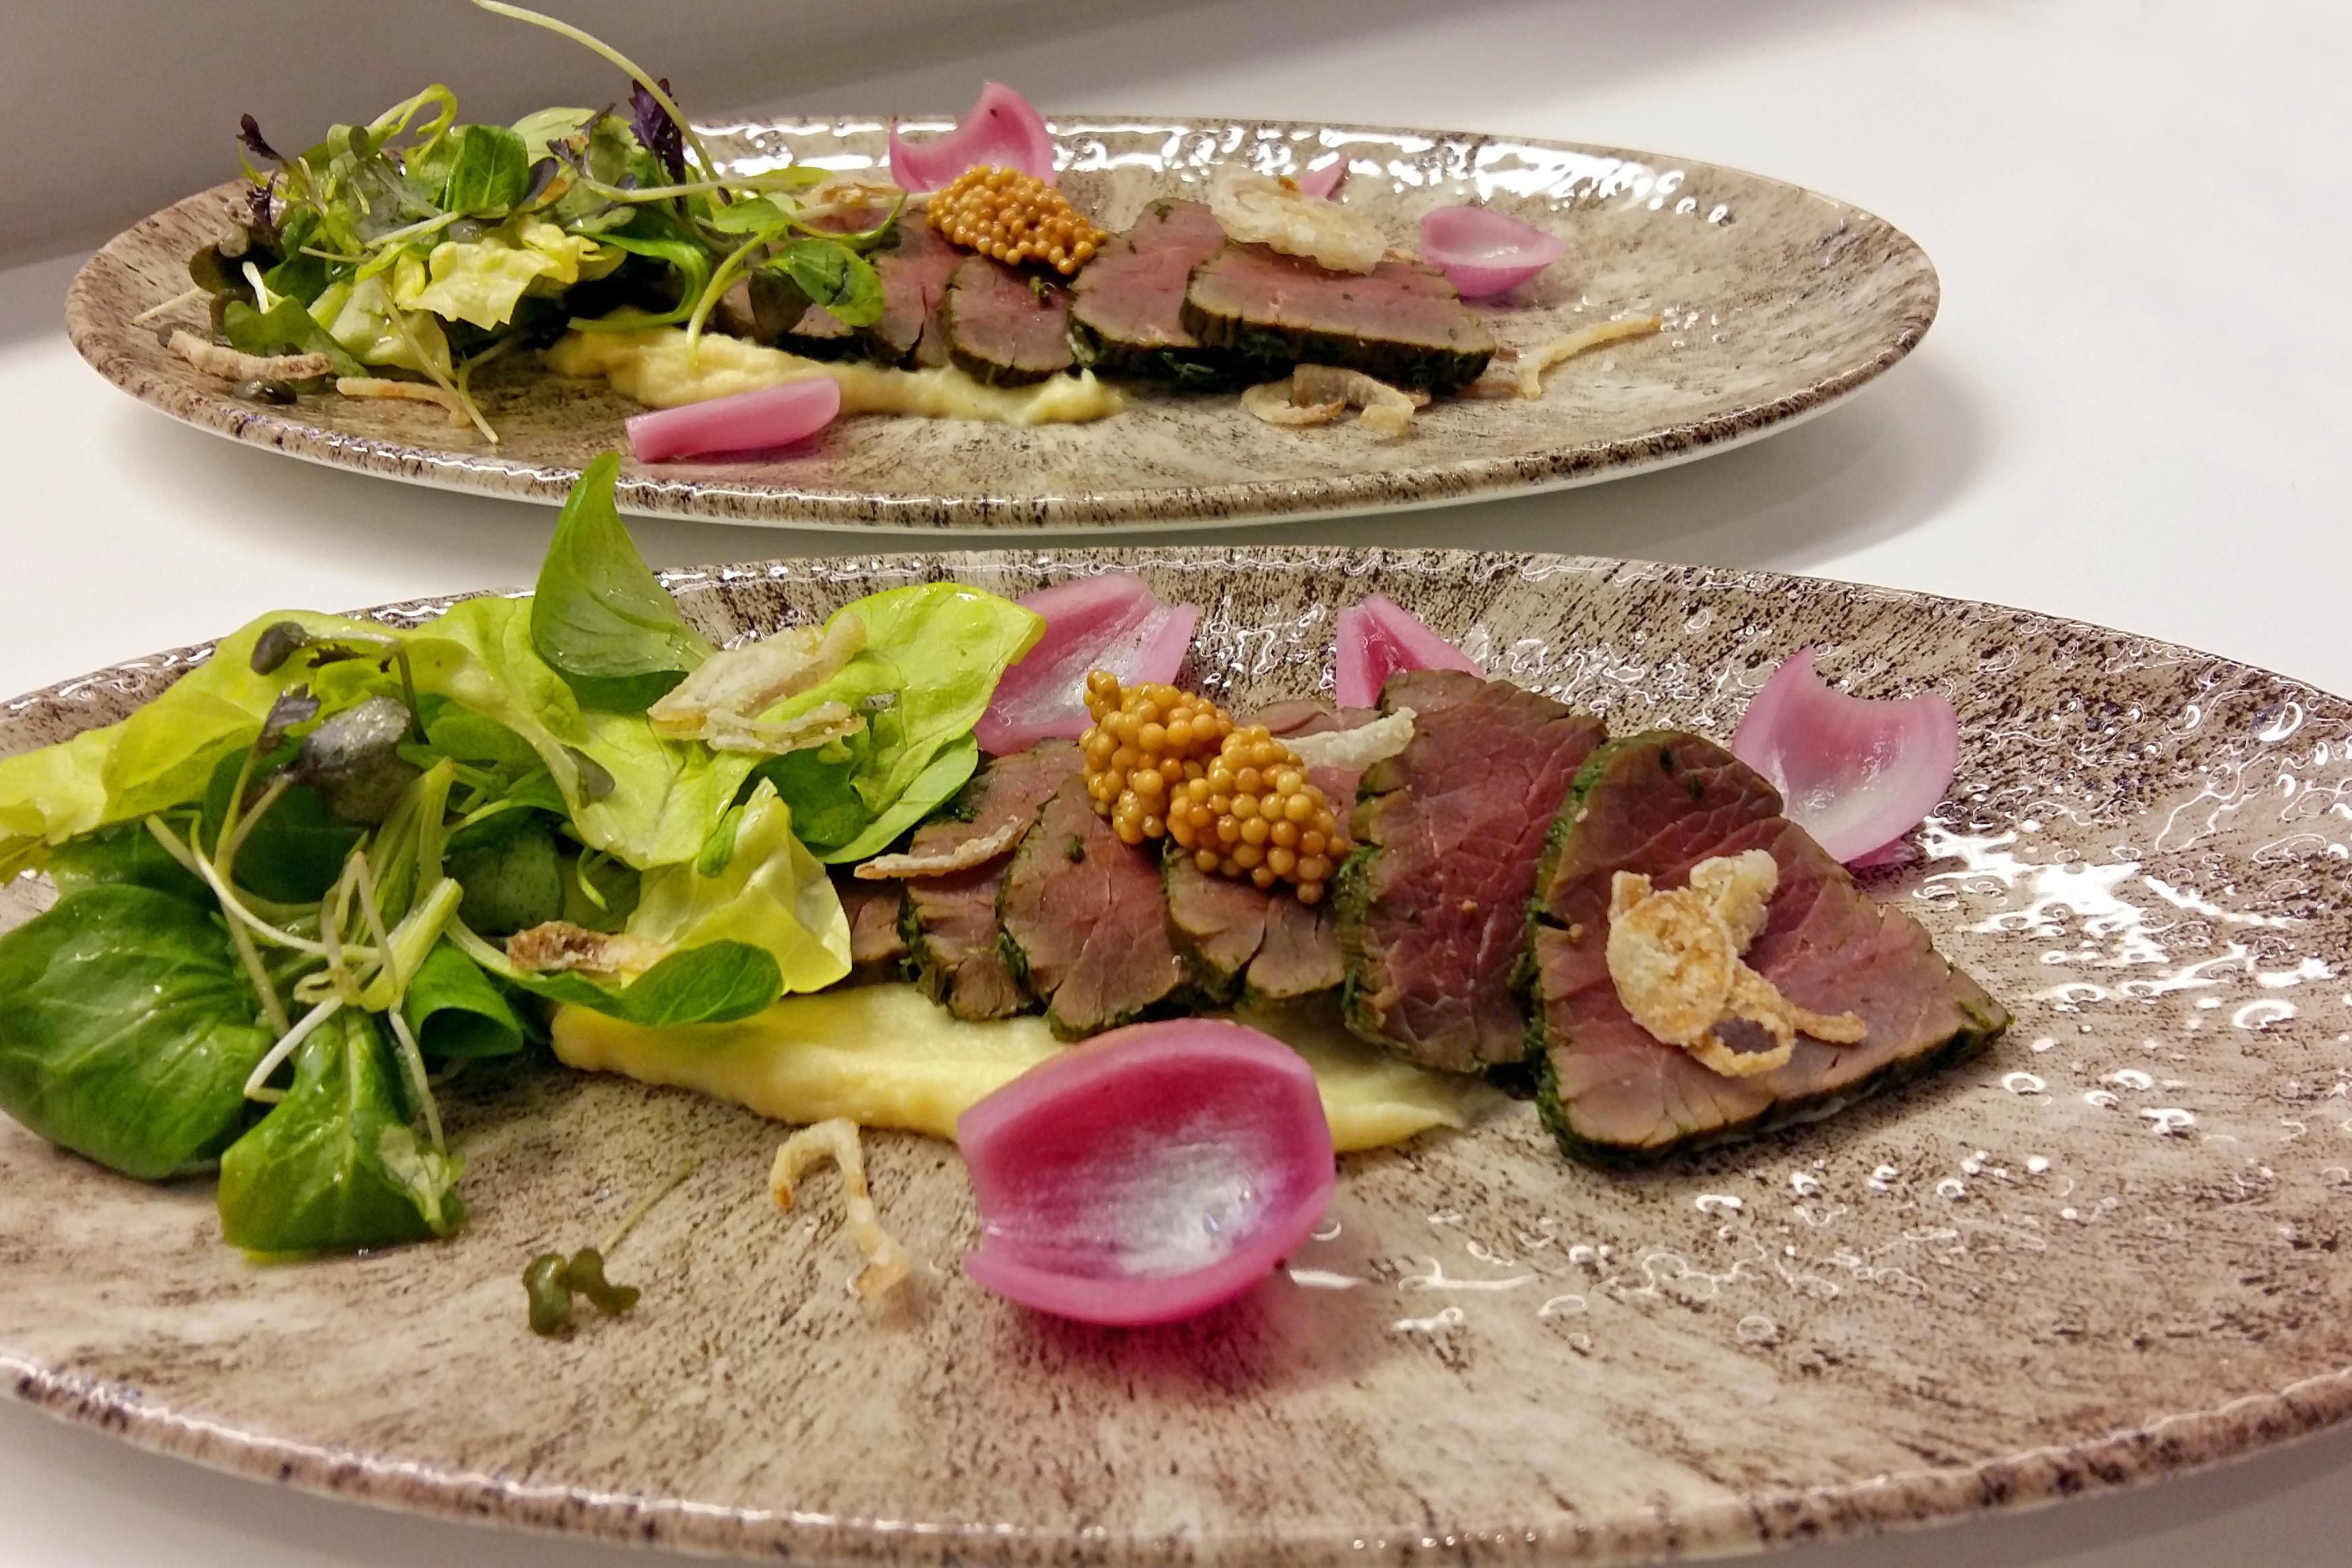 Reindeer pastrami, parsnip puree, pickled red onion with herbs